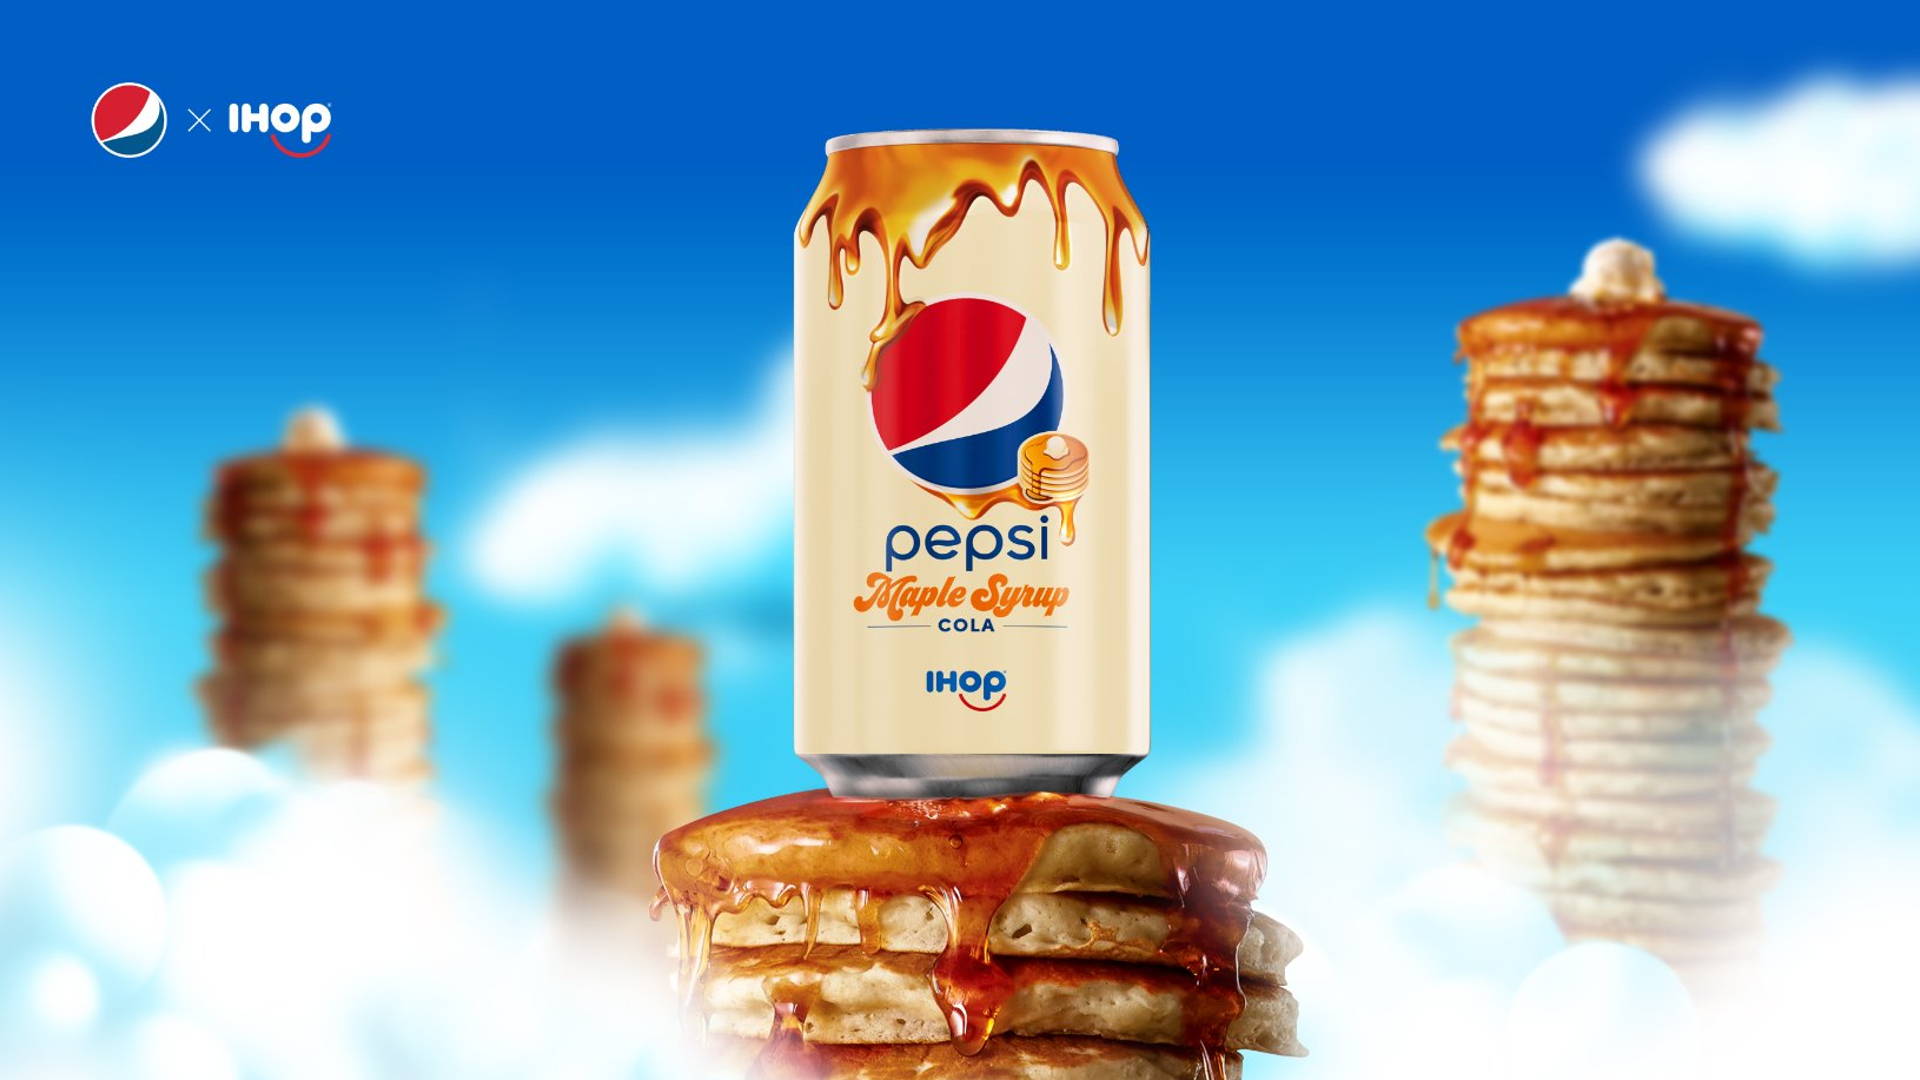 Featured image for Pepsi and IHOP Come Together With Maple Syrup and Cola Collab